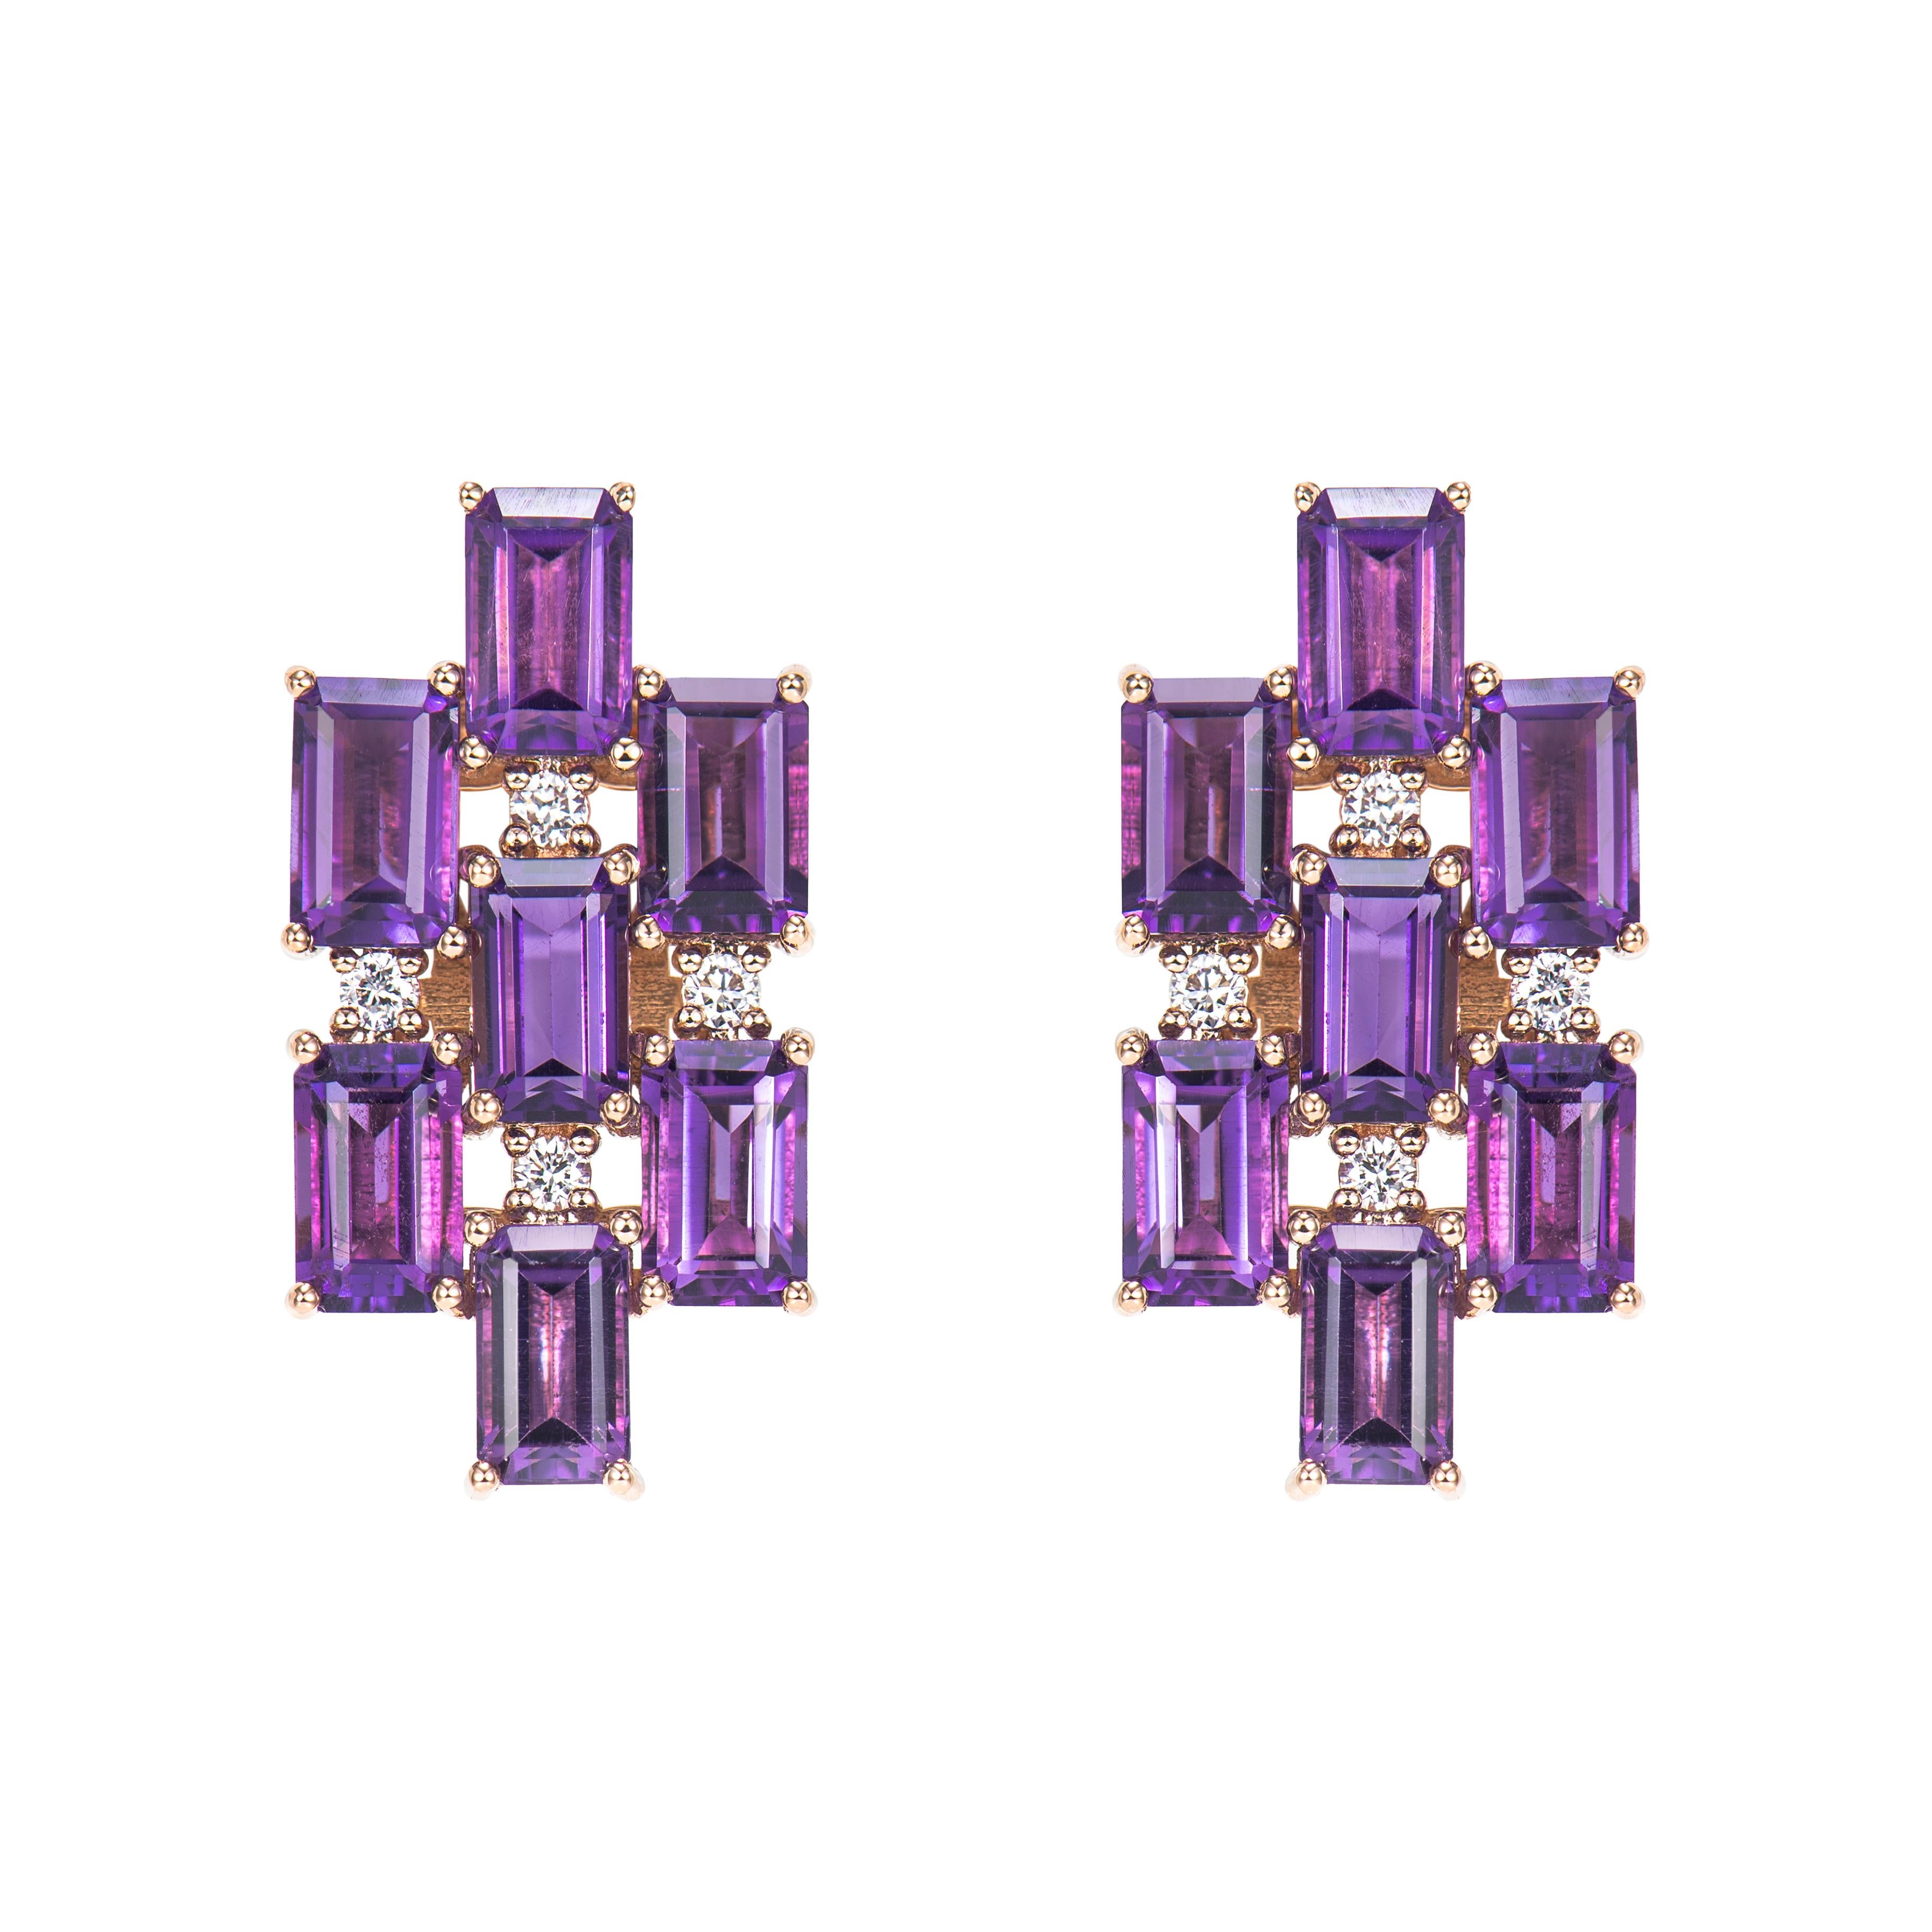 Contemporary 4.05 Carat Amethyst Drop Earring in 18Karat Rose Gold with White Diamond. For Sale